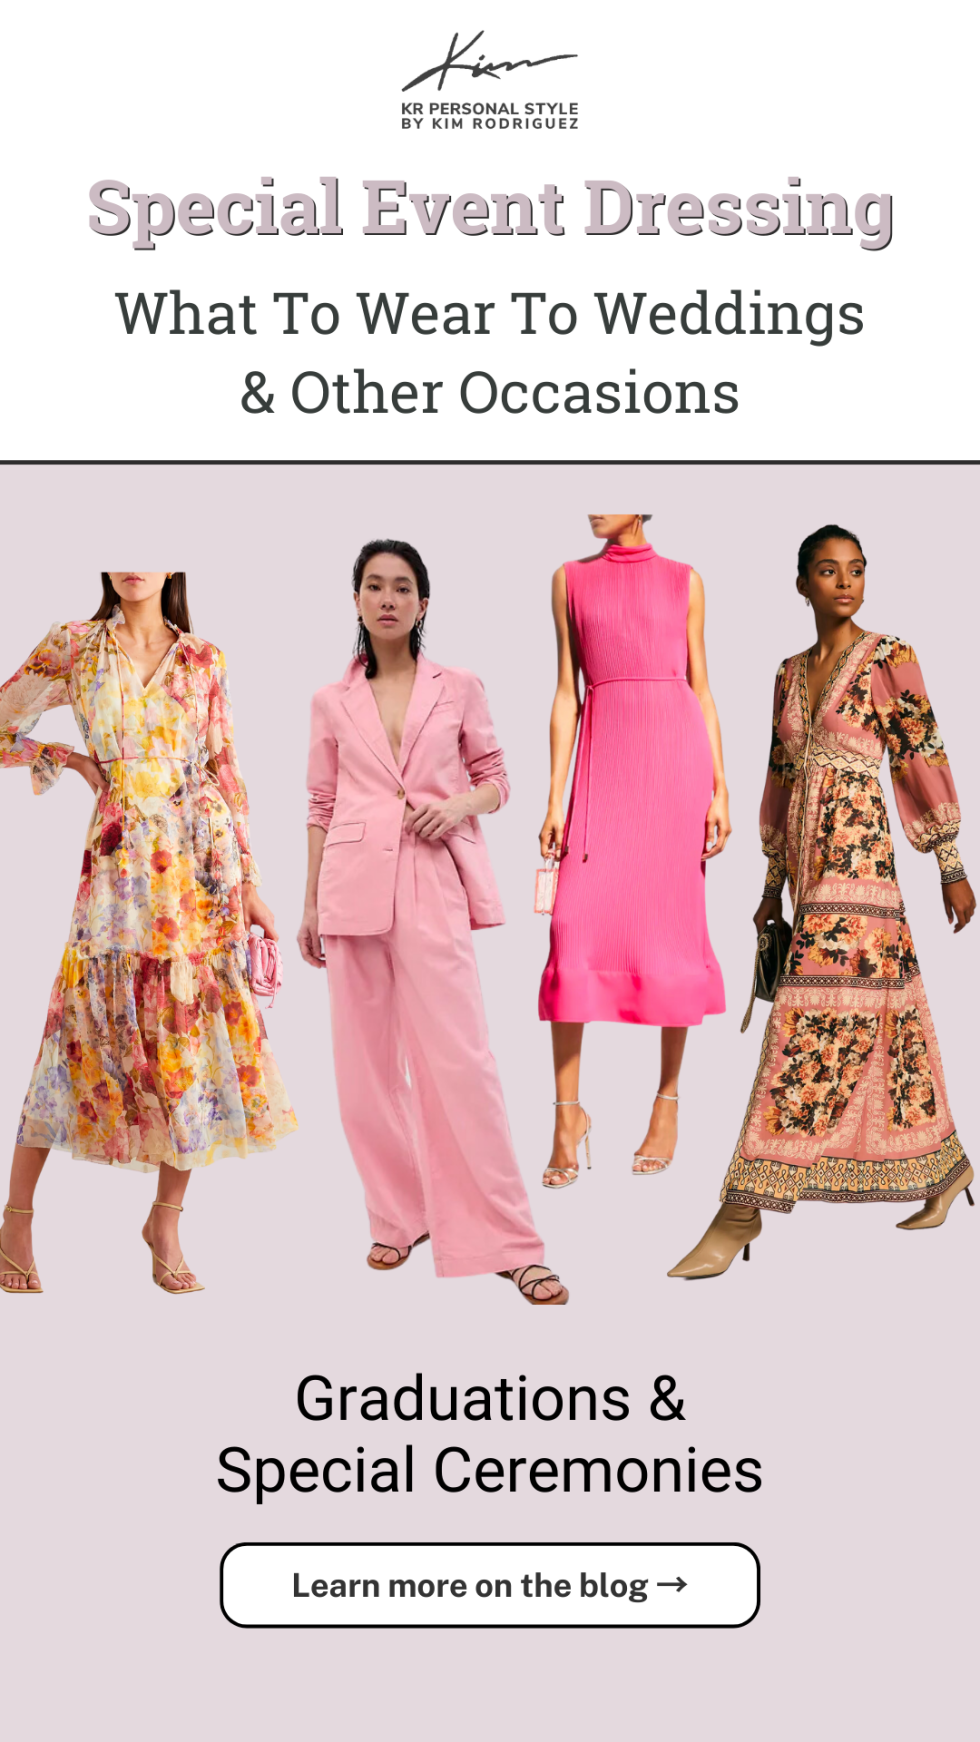 Special Event Dressing: What To Wear To Weddings & Events